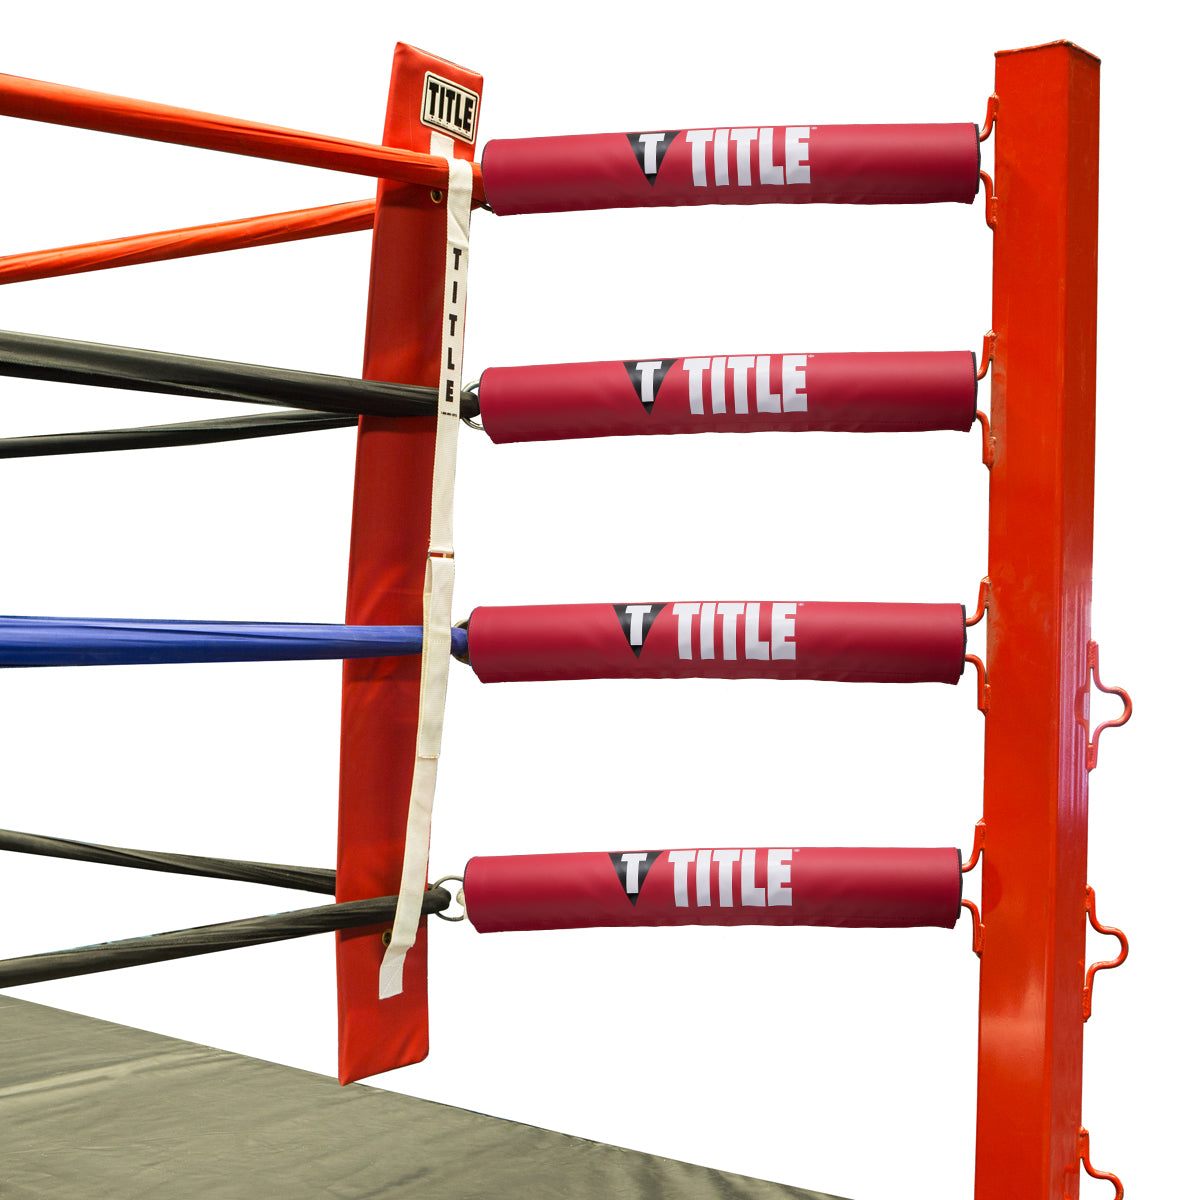 TITLE Boxing Ring Turnbuckle Covers